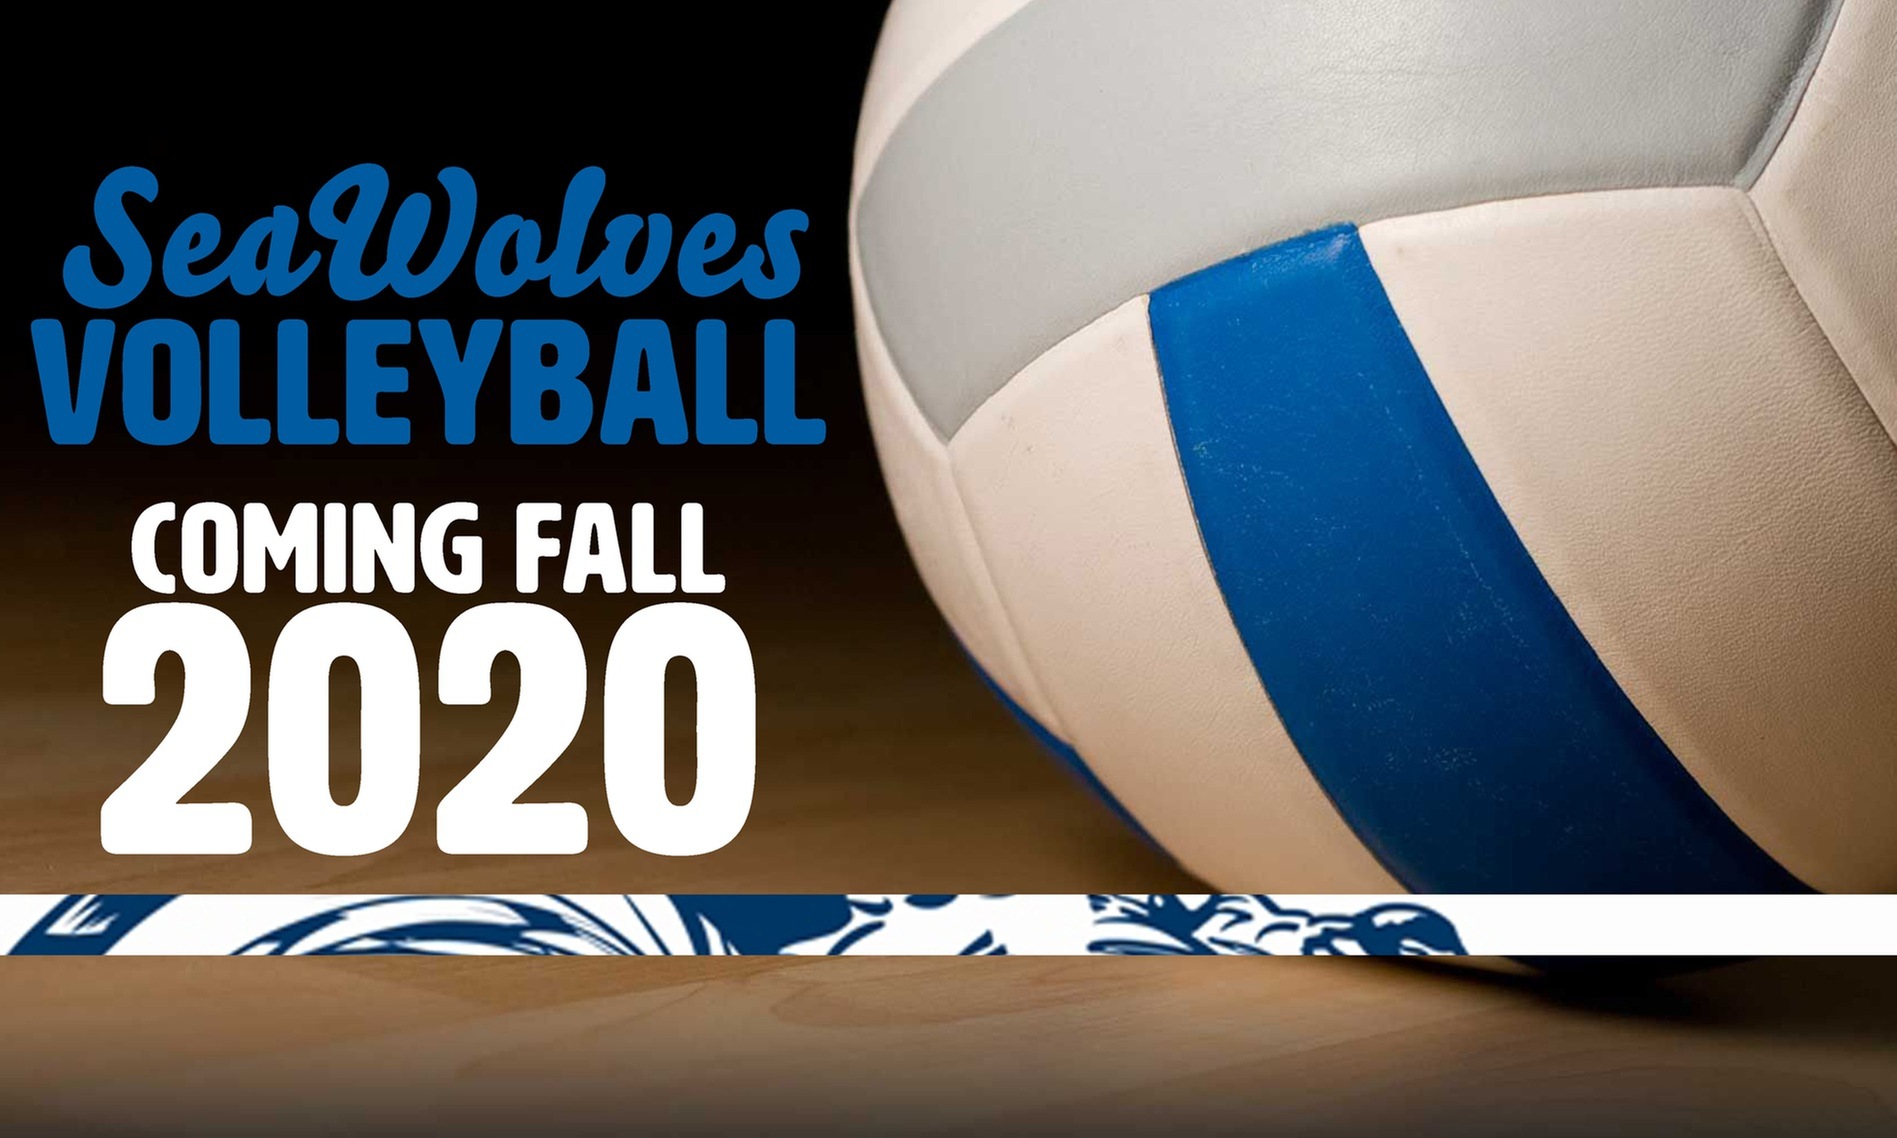 SMCC to add Women's Volleyball in fall 2020